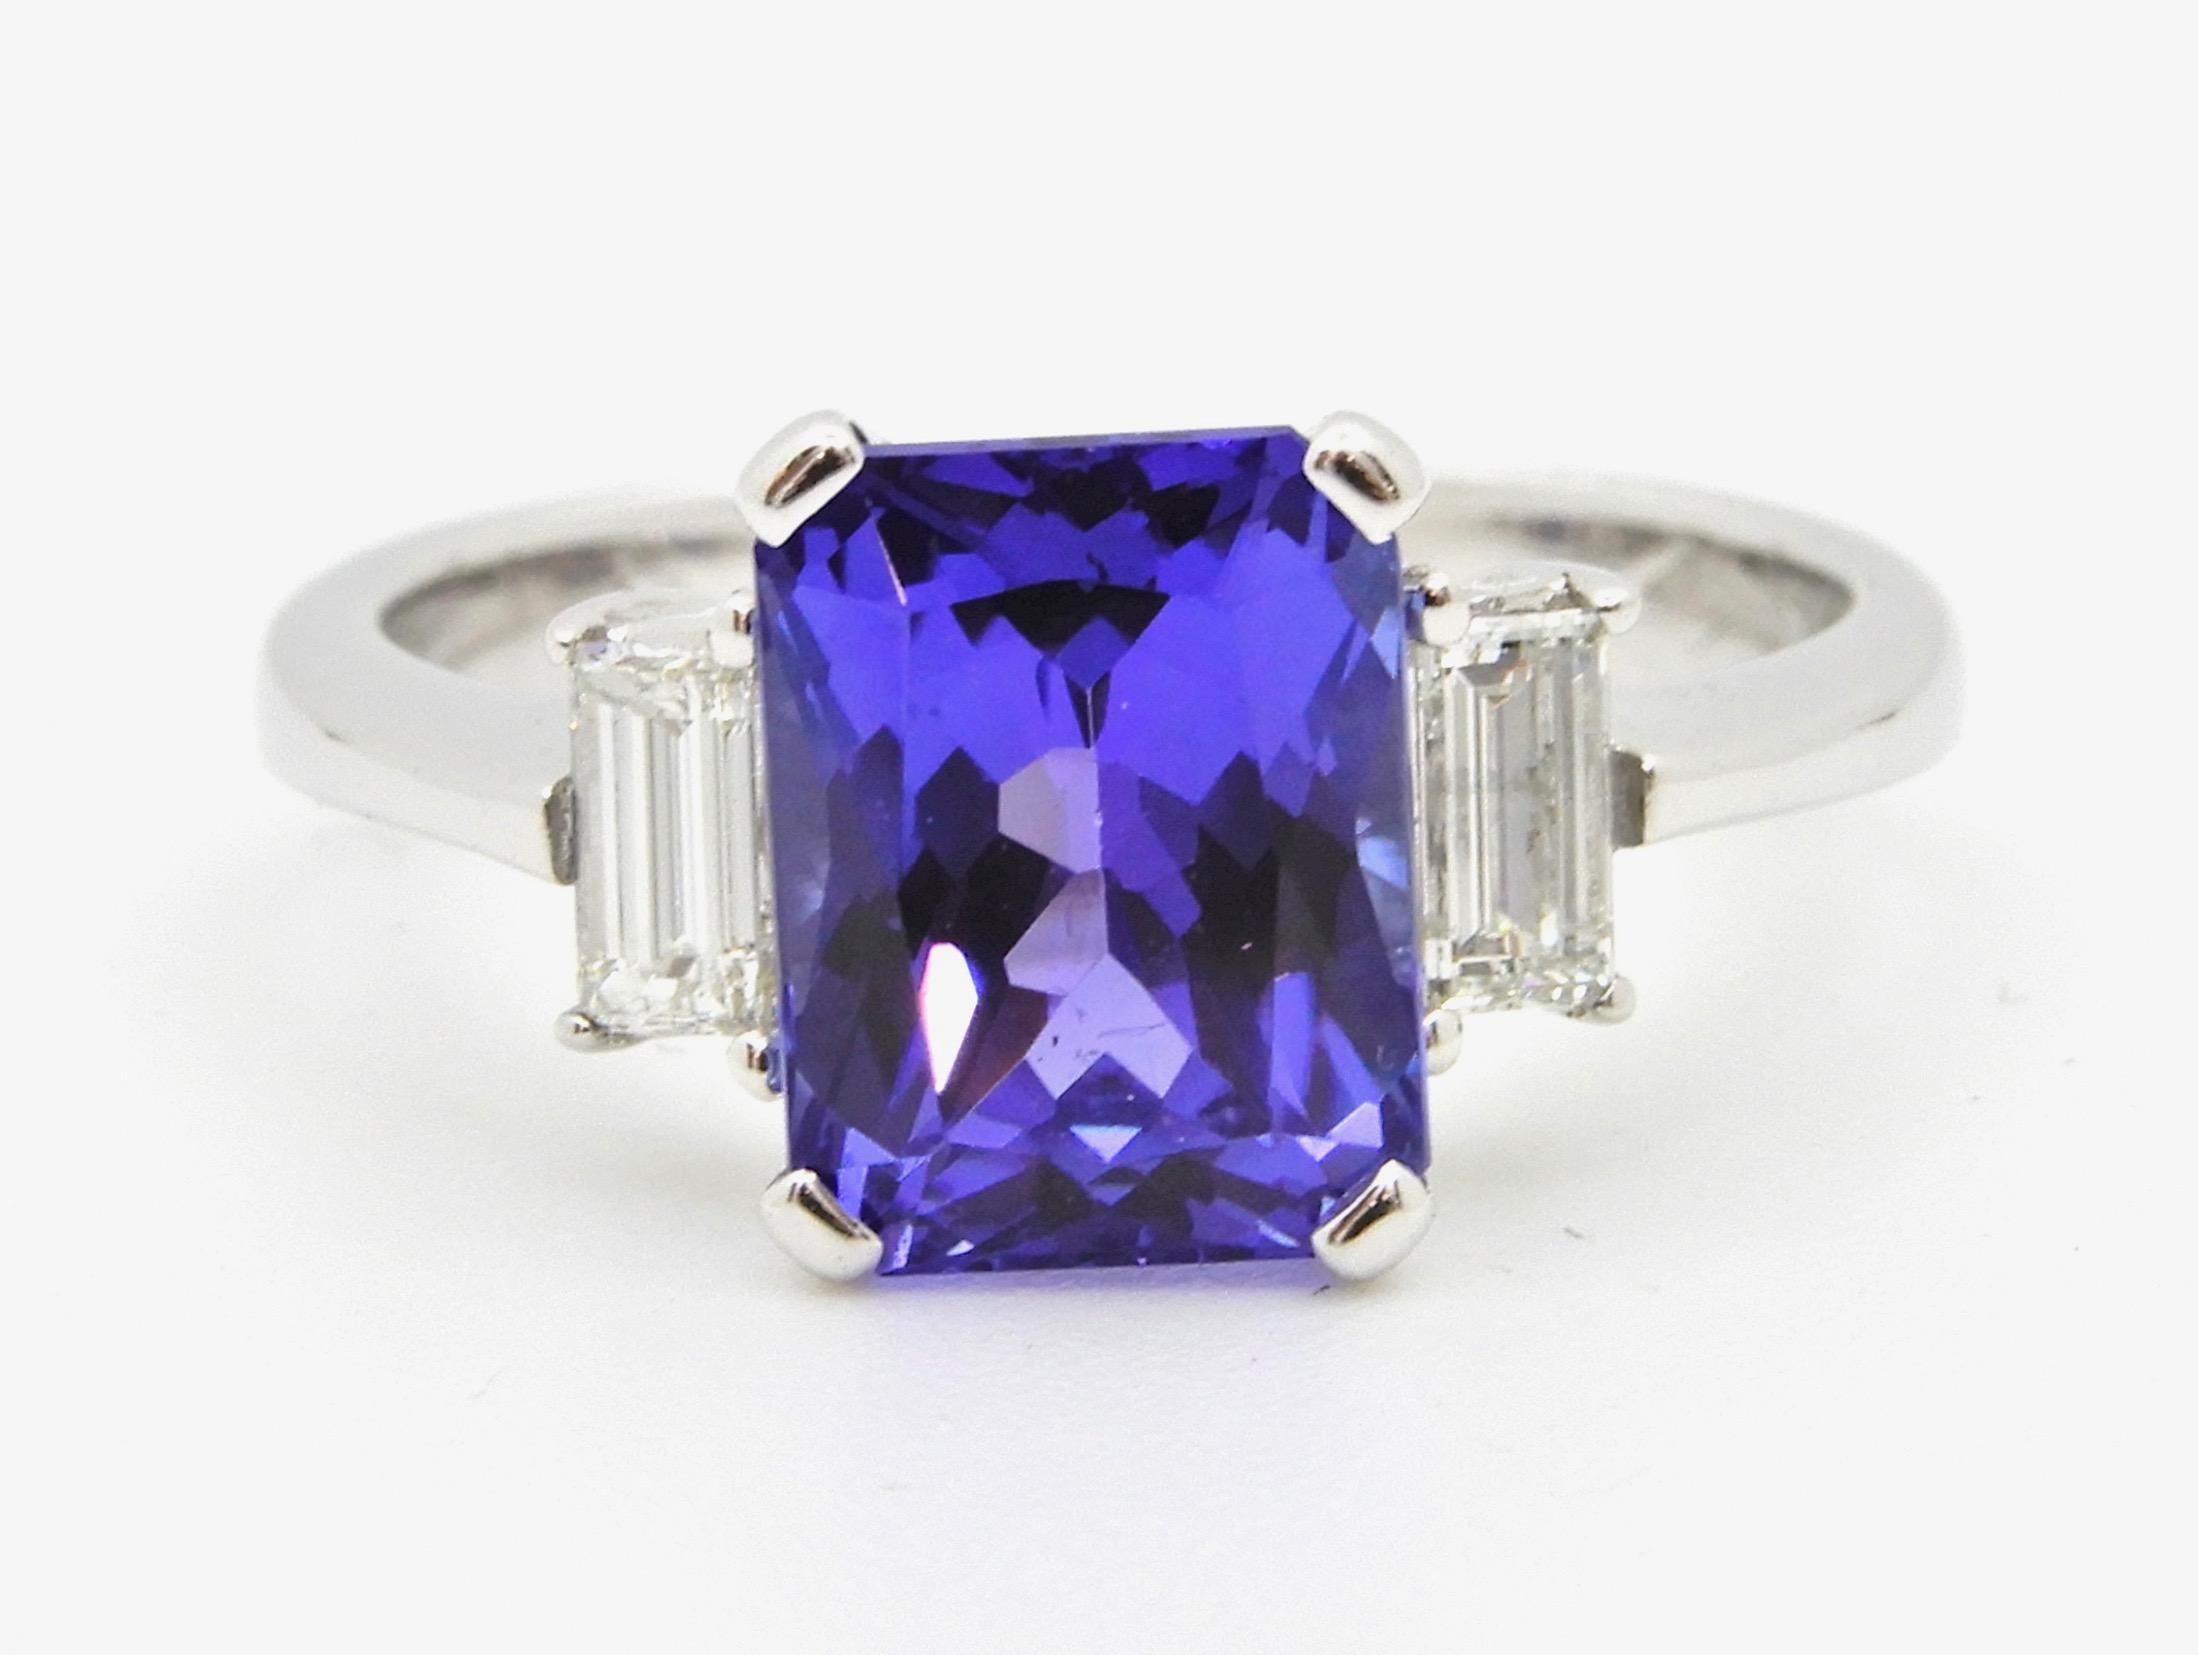 This 2.58 Carat Radiant Cut Tanzanite Diamond Cocktail Ring is set in 18 carat Australian White Gold. The has rising shoulders that support a central 4 claw mount, holding one emerald radiant cut Tanzanite, flanked by one claw set baguette cut